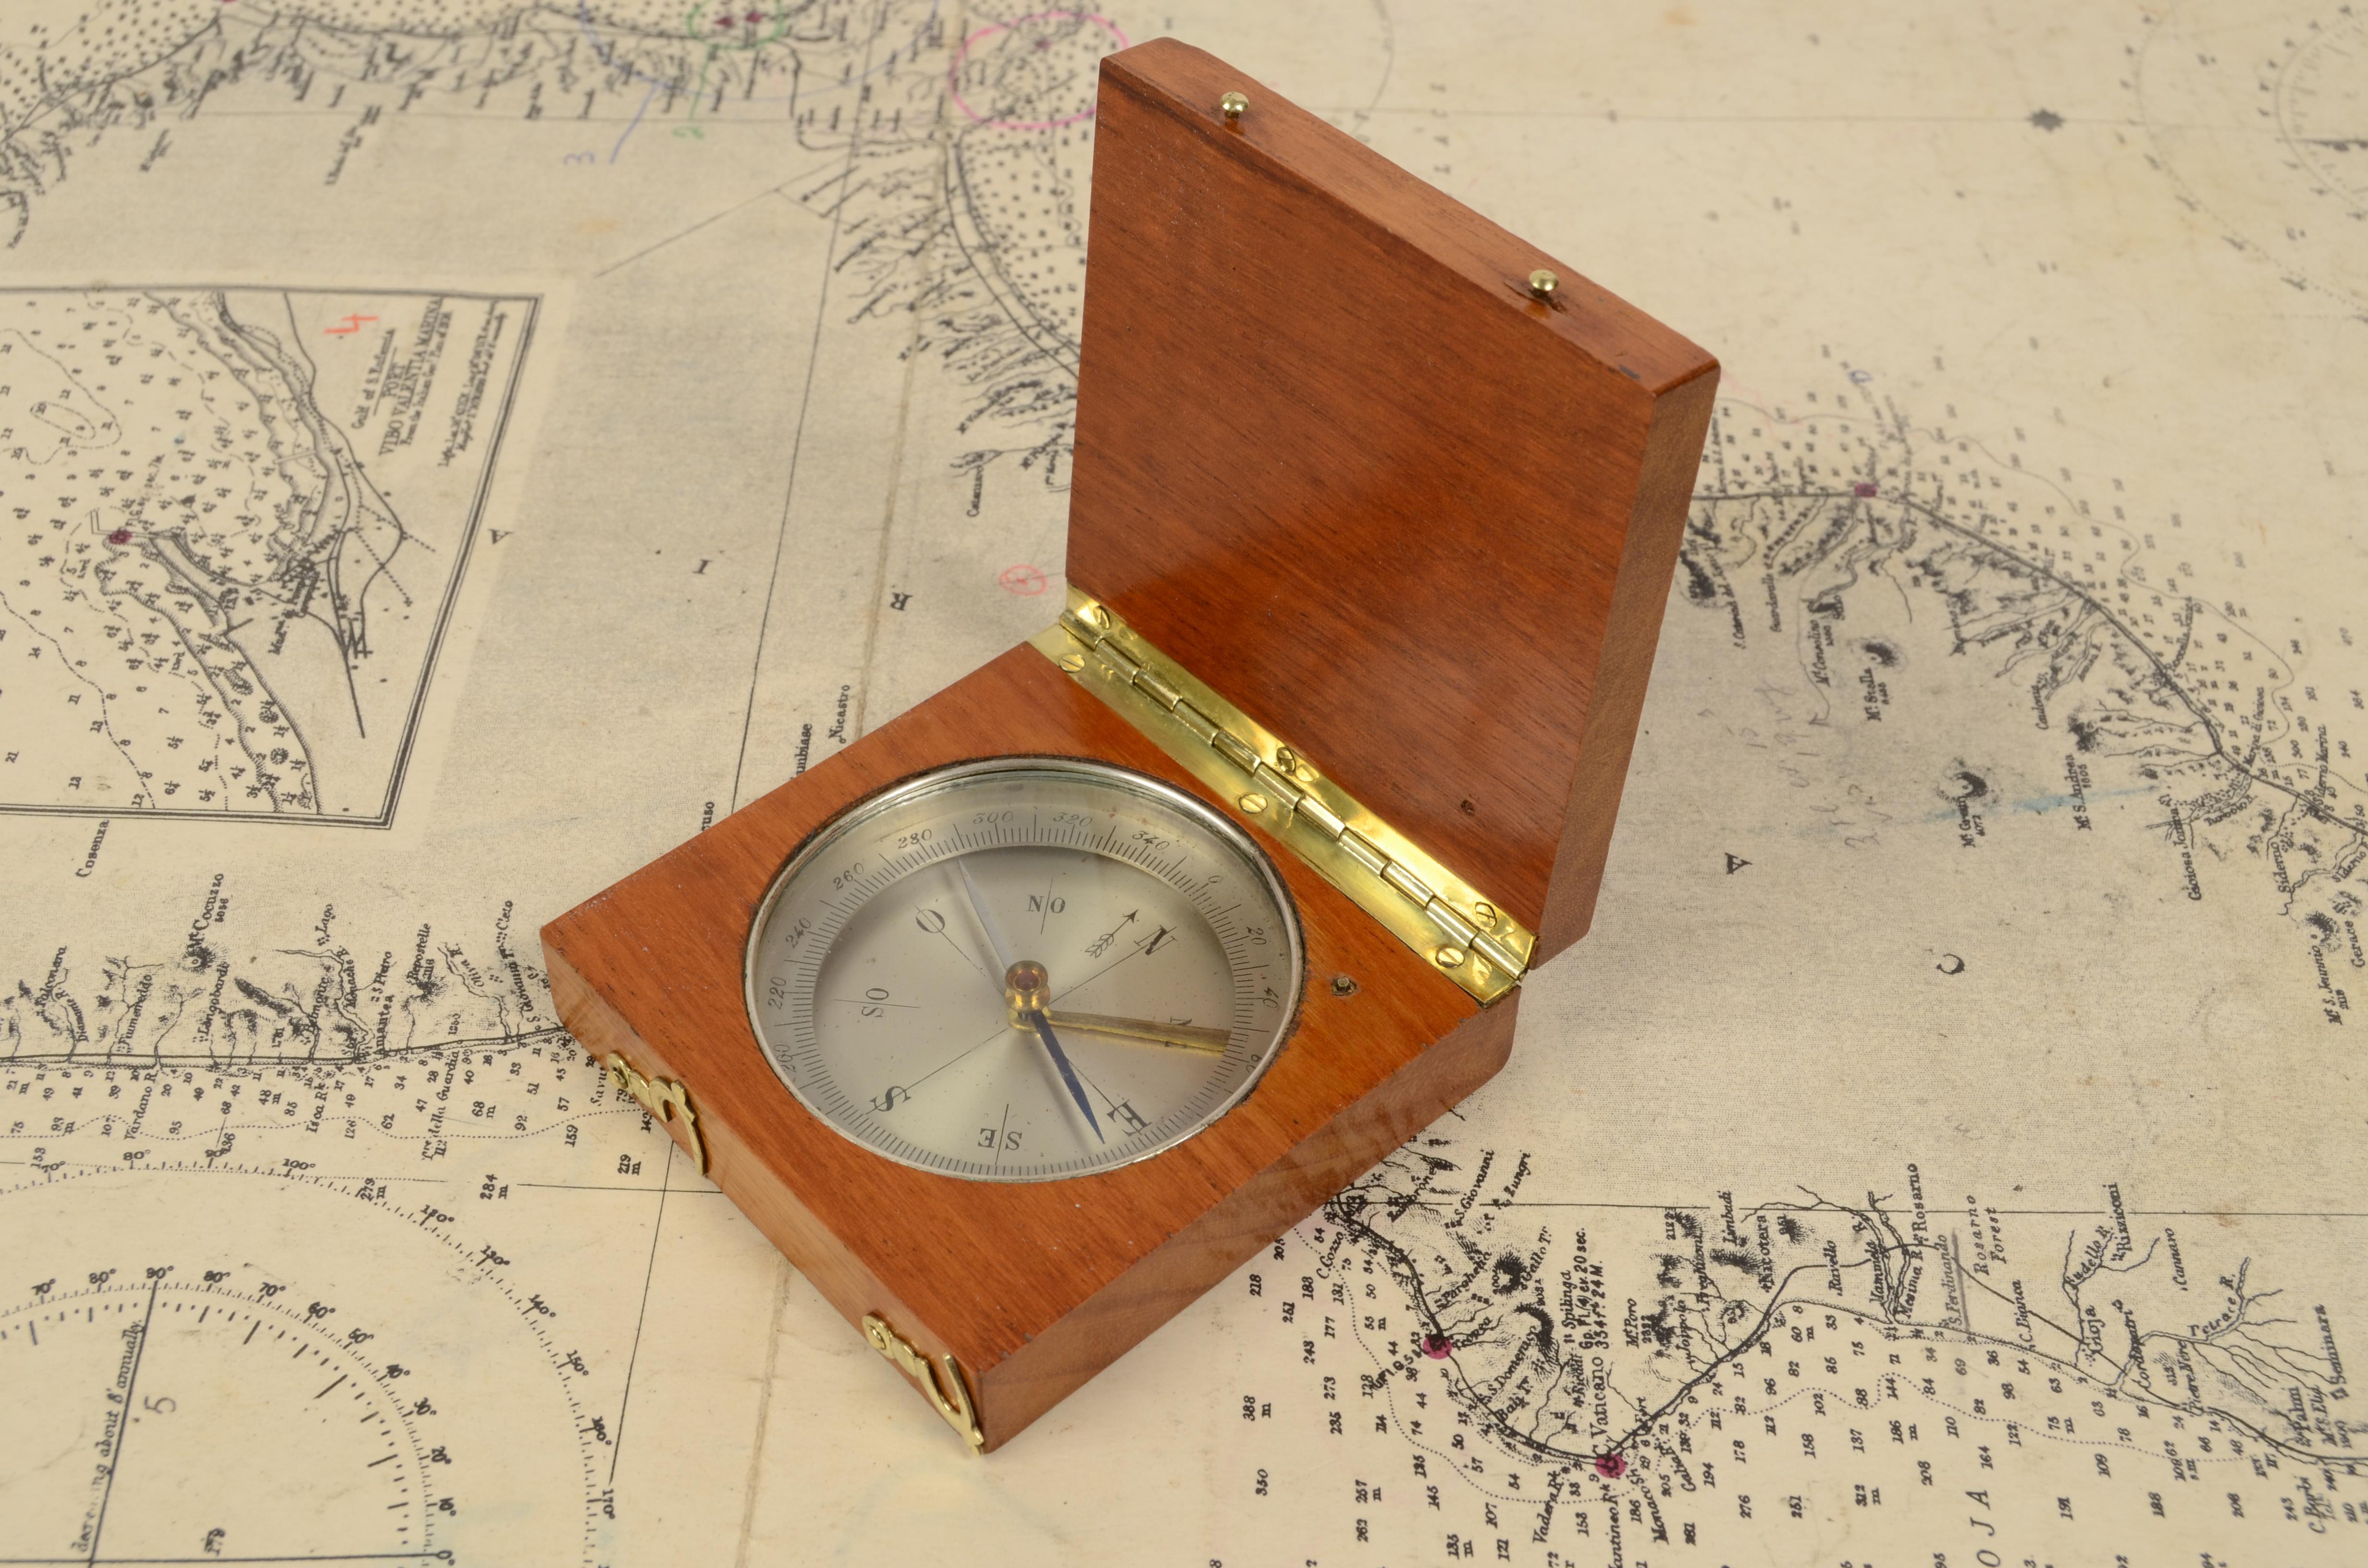 Magnetic topographic compass, of oak and brass; instrument consisting of a magnetized needle free to rotate on a horizontal plane, marking with the tip of the needle the direction of magnetic north, compass card with eight winds complete with